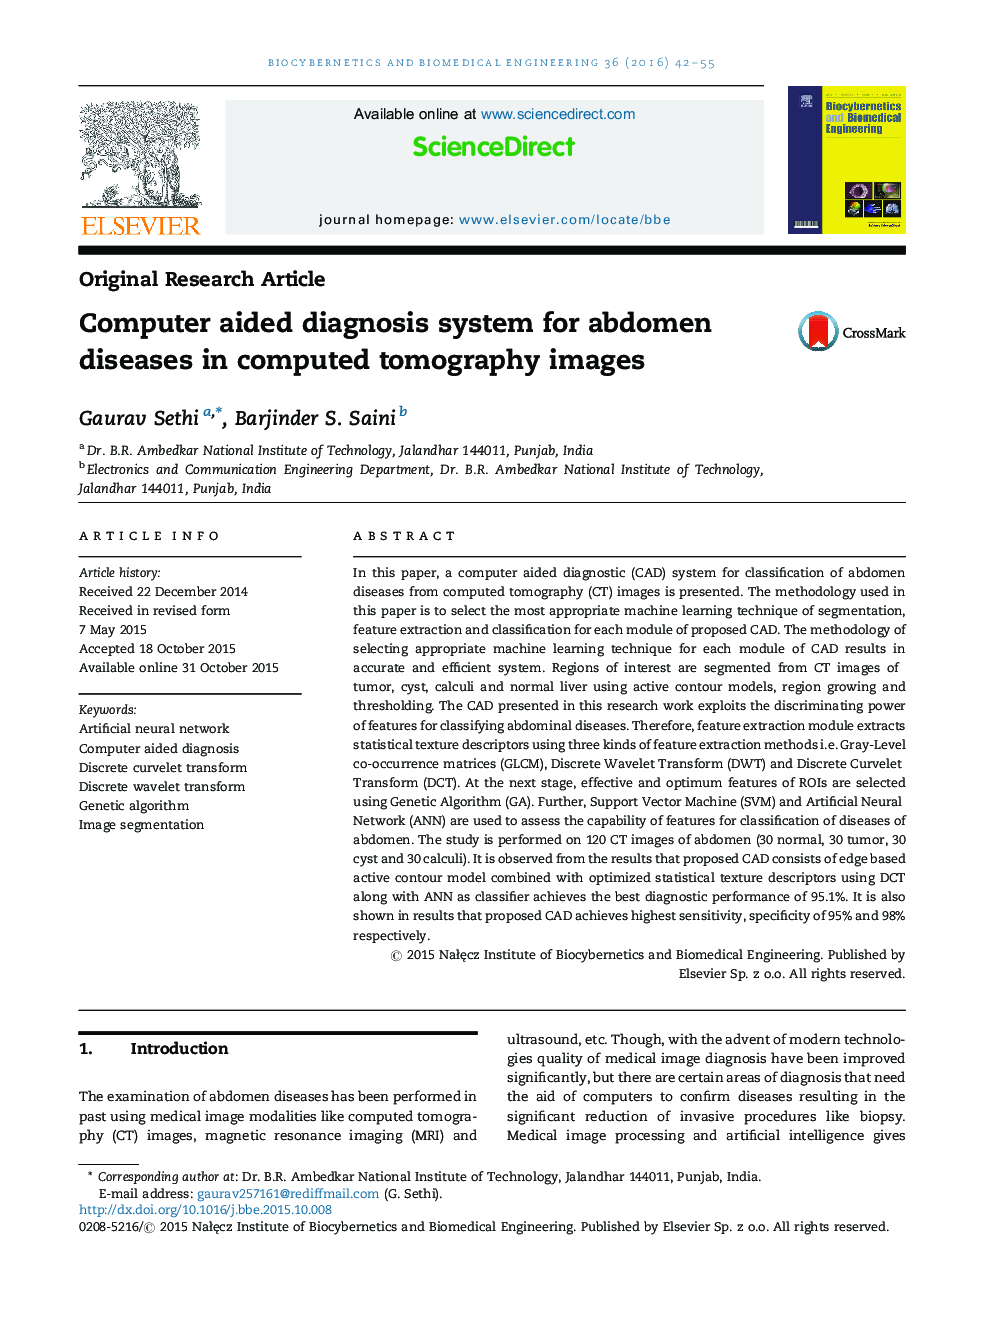 Computer aided diagnosis system for abdomen diseases in computed tomography images